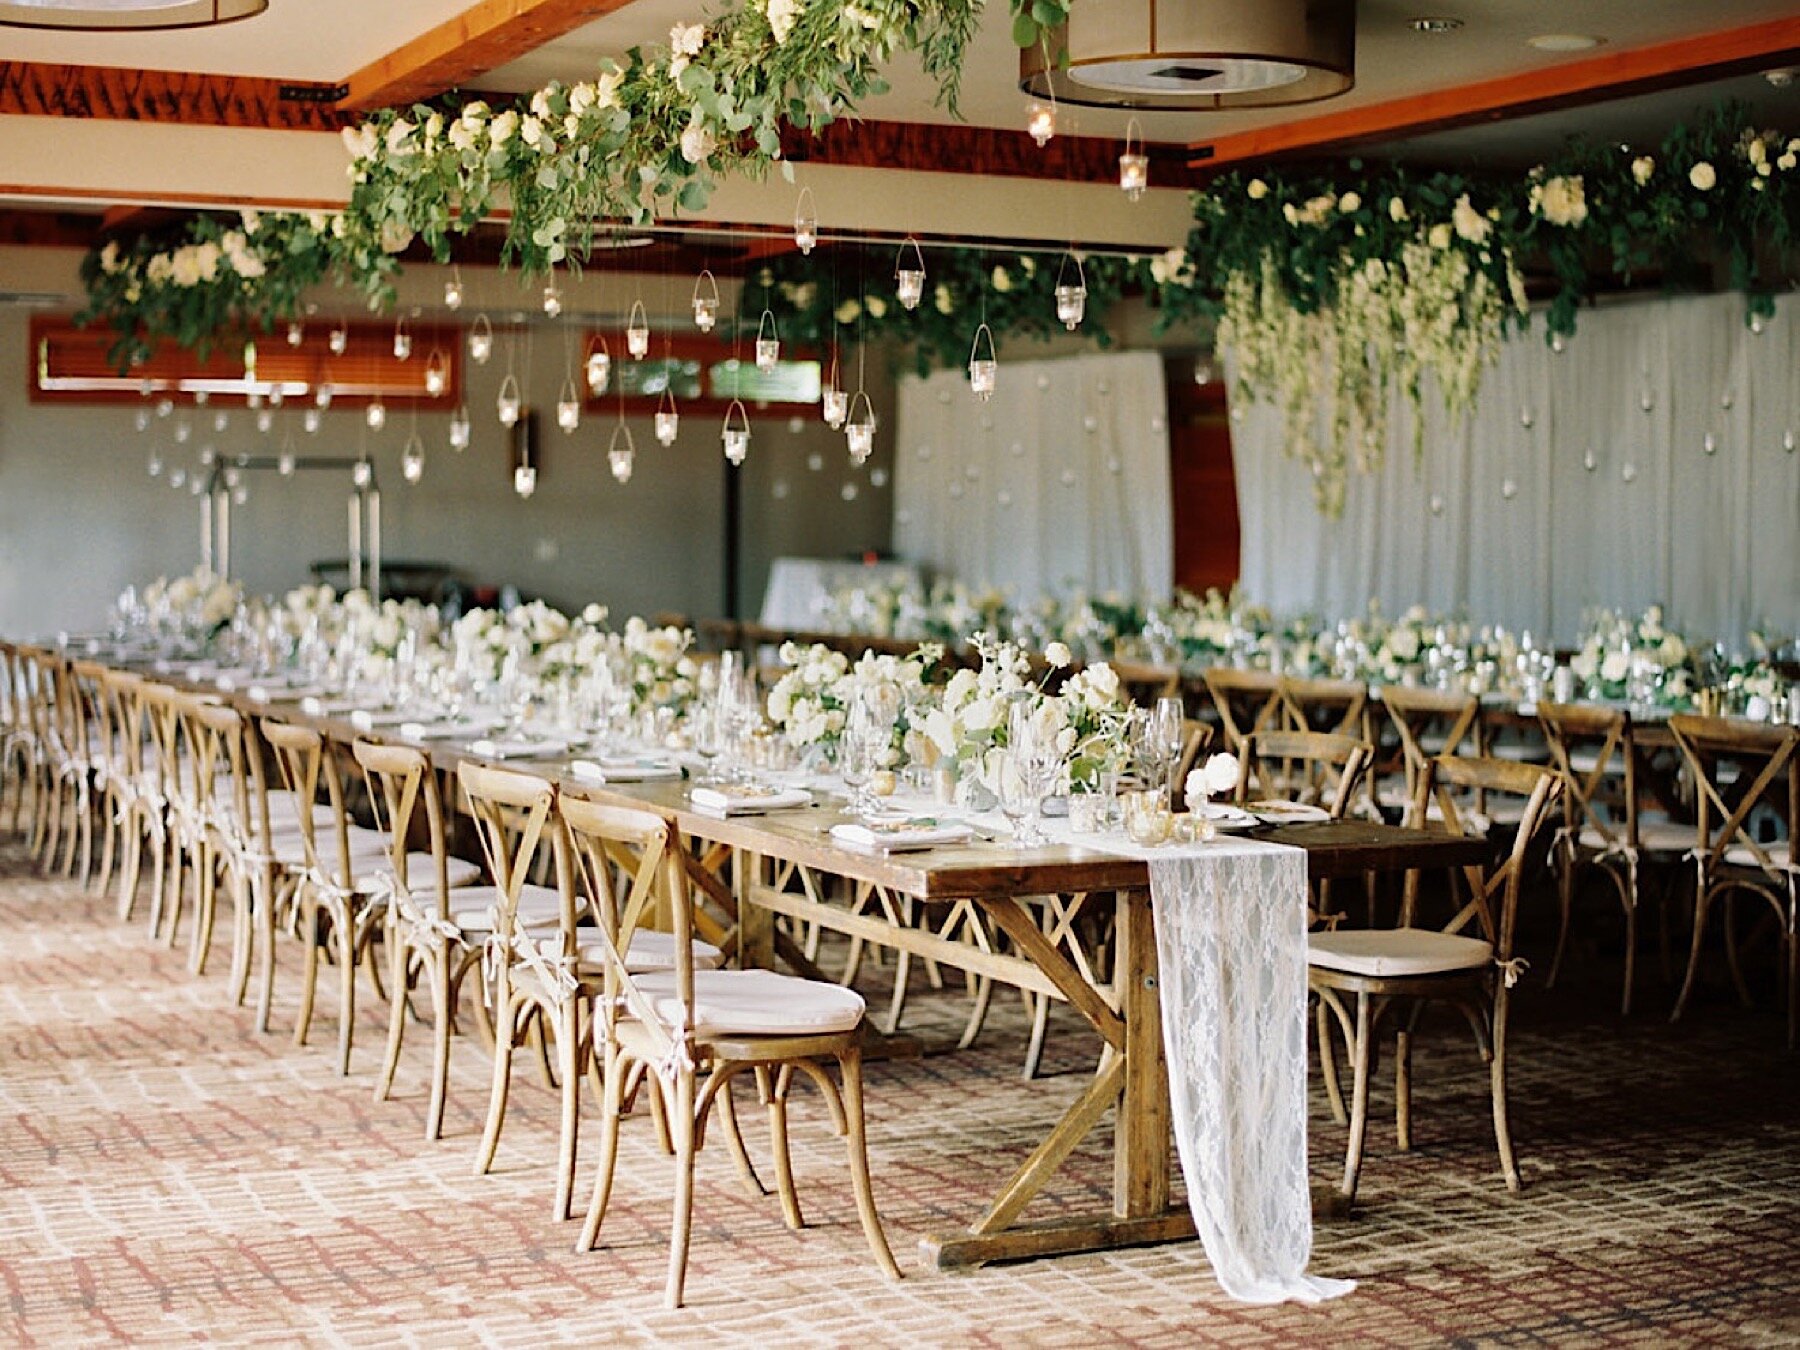 12_wedding_White_luxury_Lodge_green_Company_by_at_Design_and_florist_Seattle_Gather_Willows_top.jpg